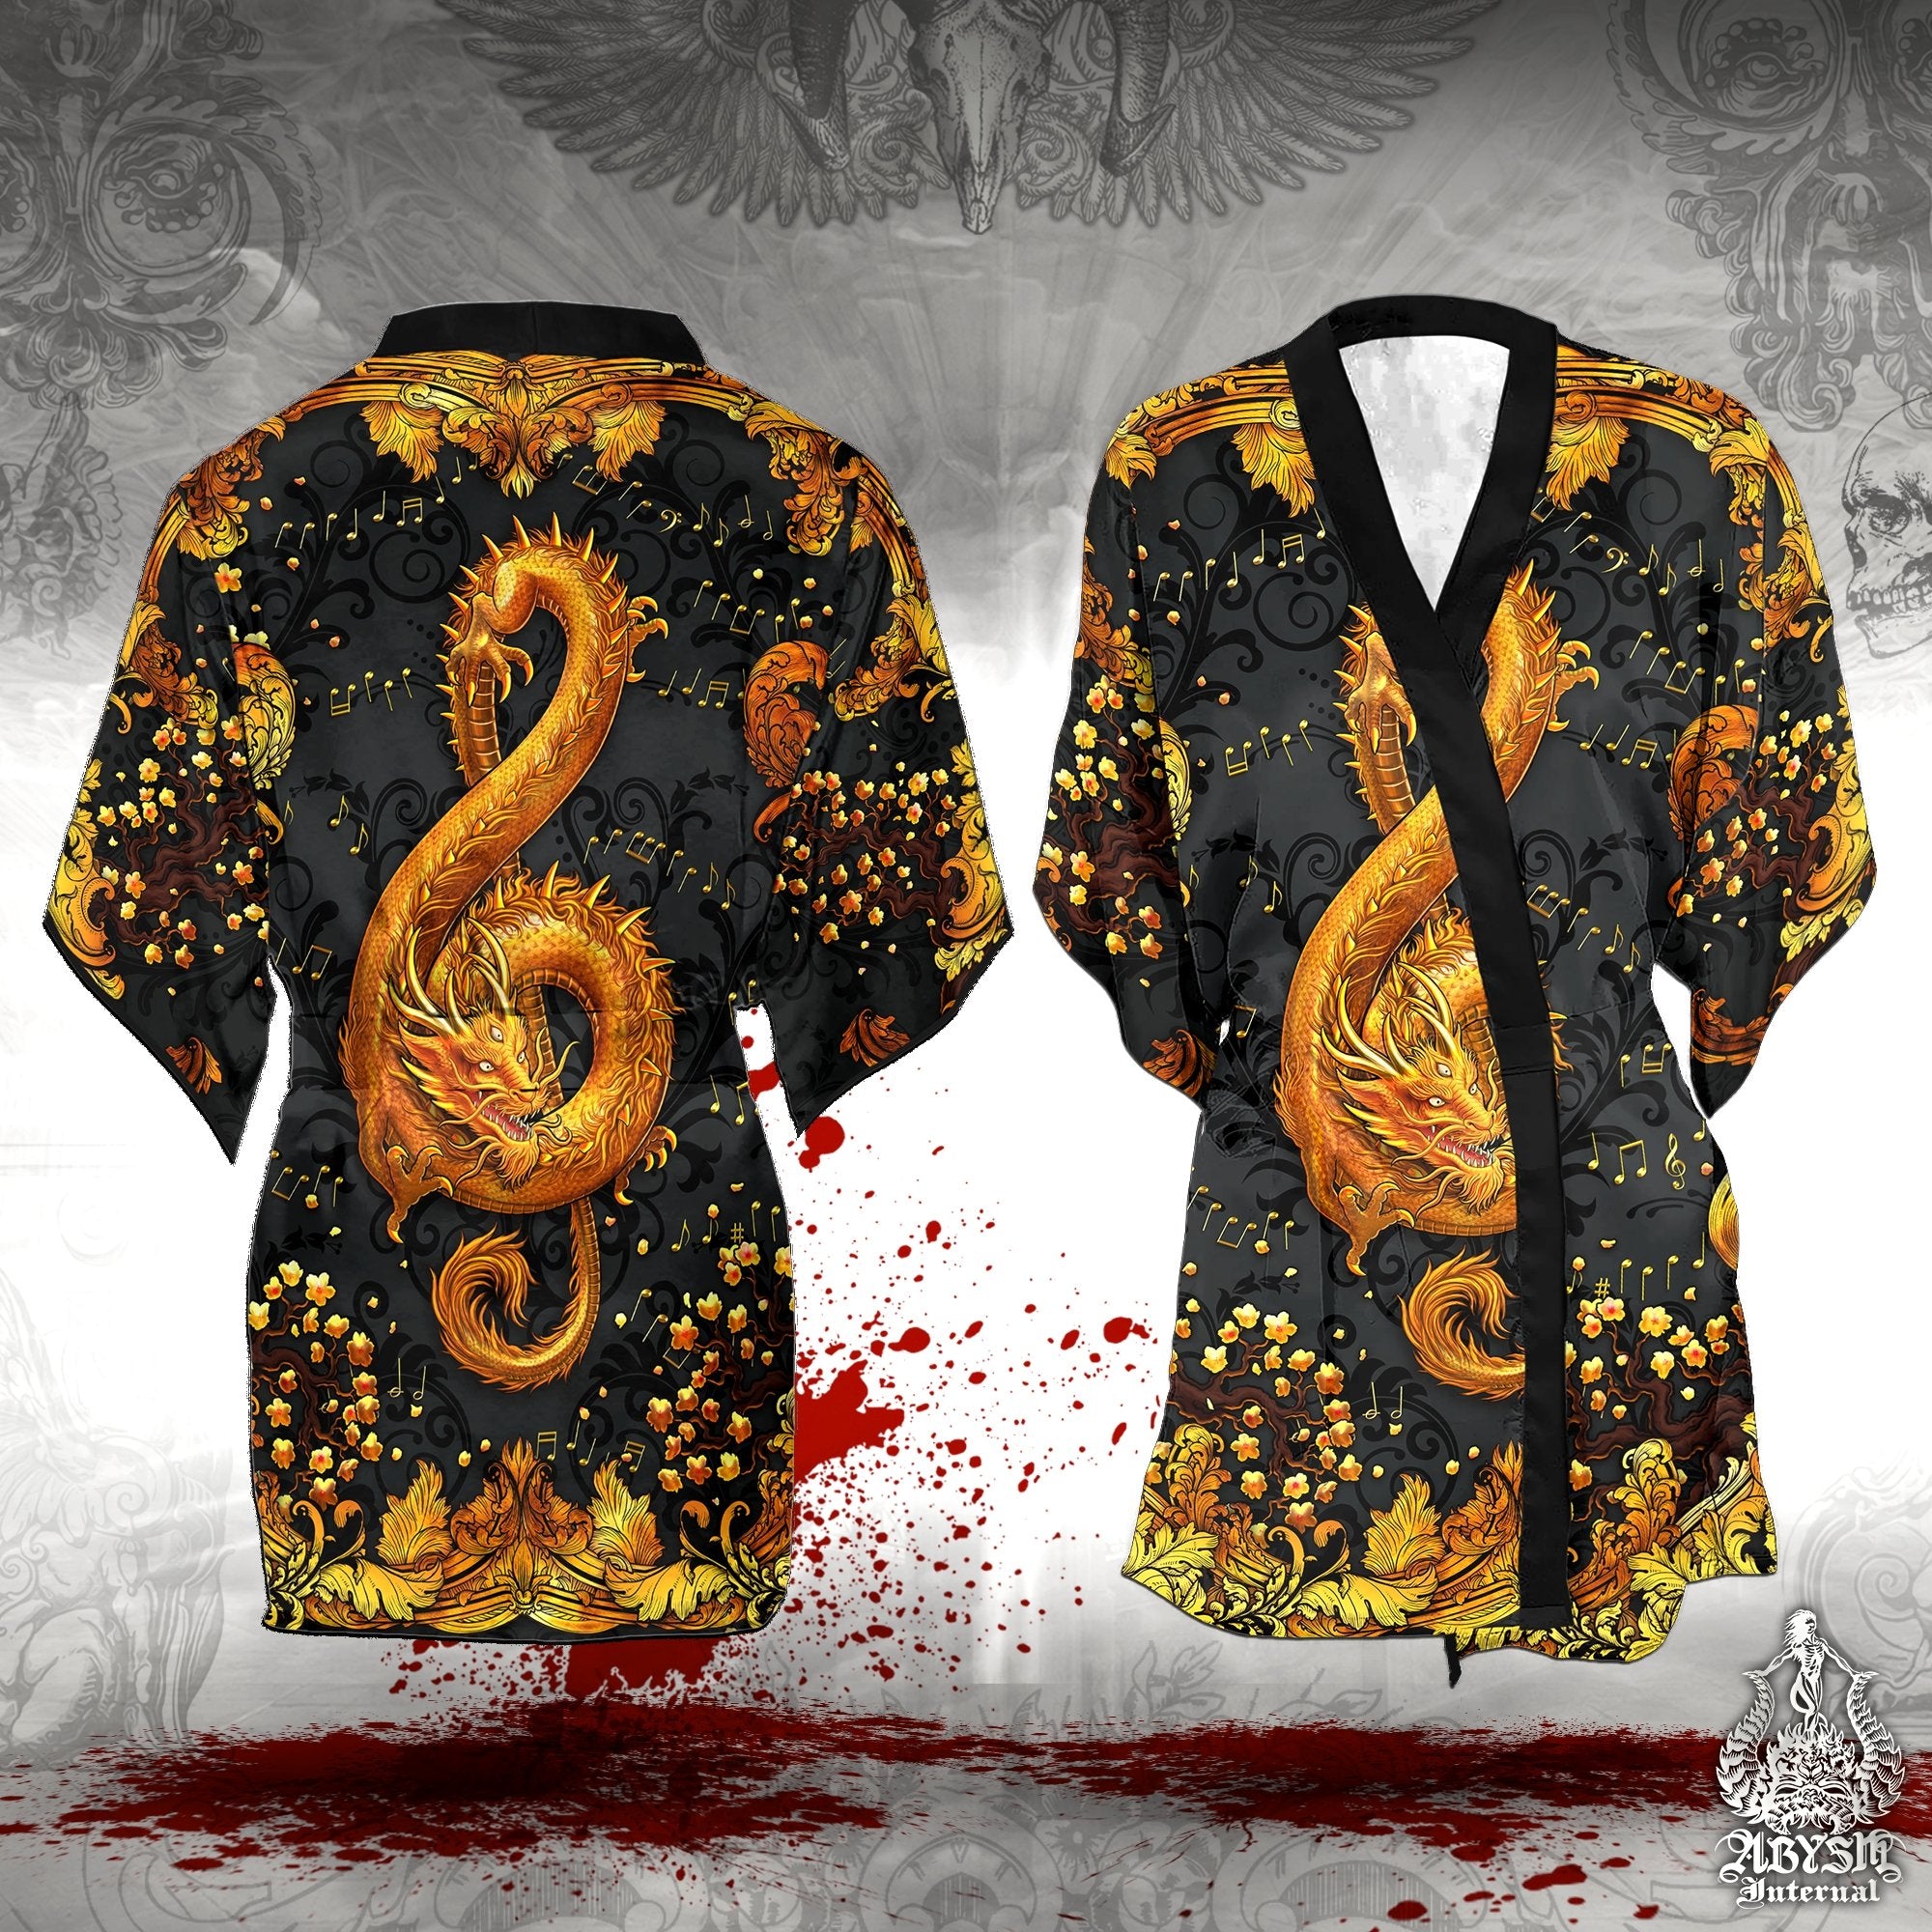 Music Cover Up, Beach Outfit, Party Kimono, Summer Festival Robe, Indie and Alternative Clothing, Unisex - Dragon, Gold Black - Abysm Internal